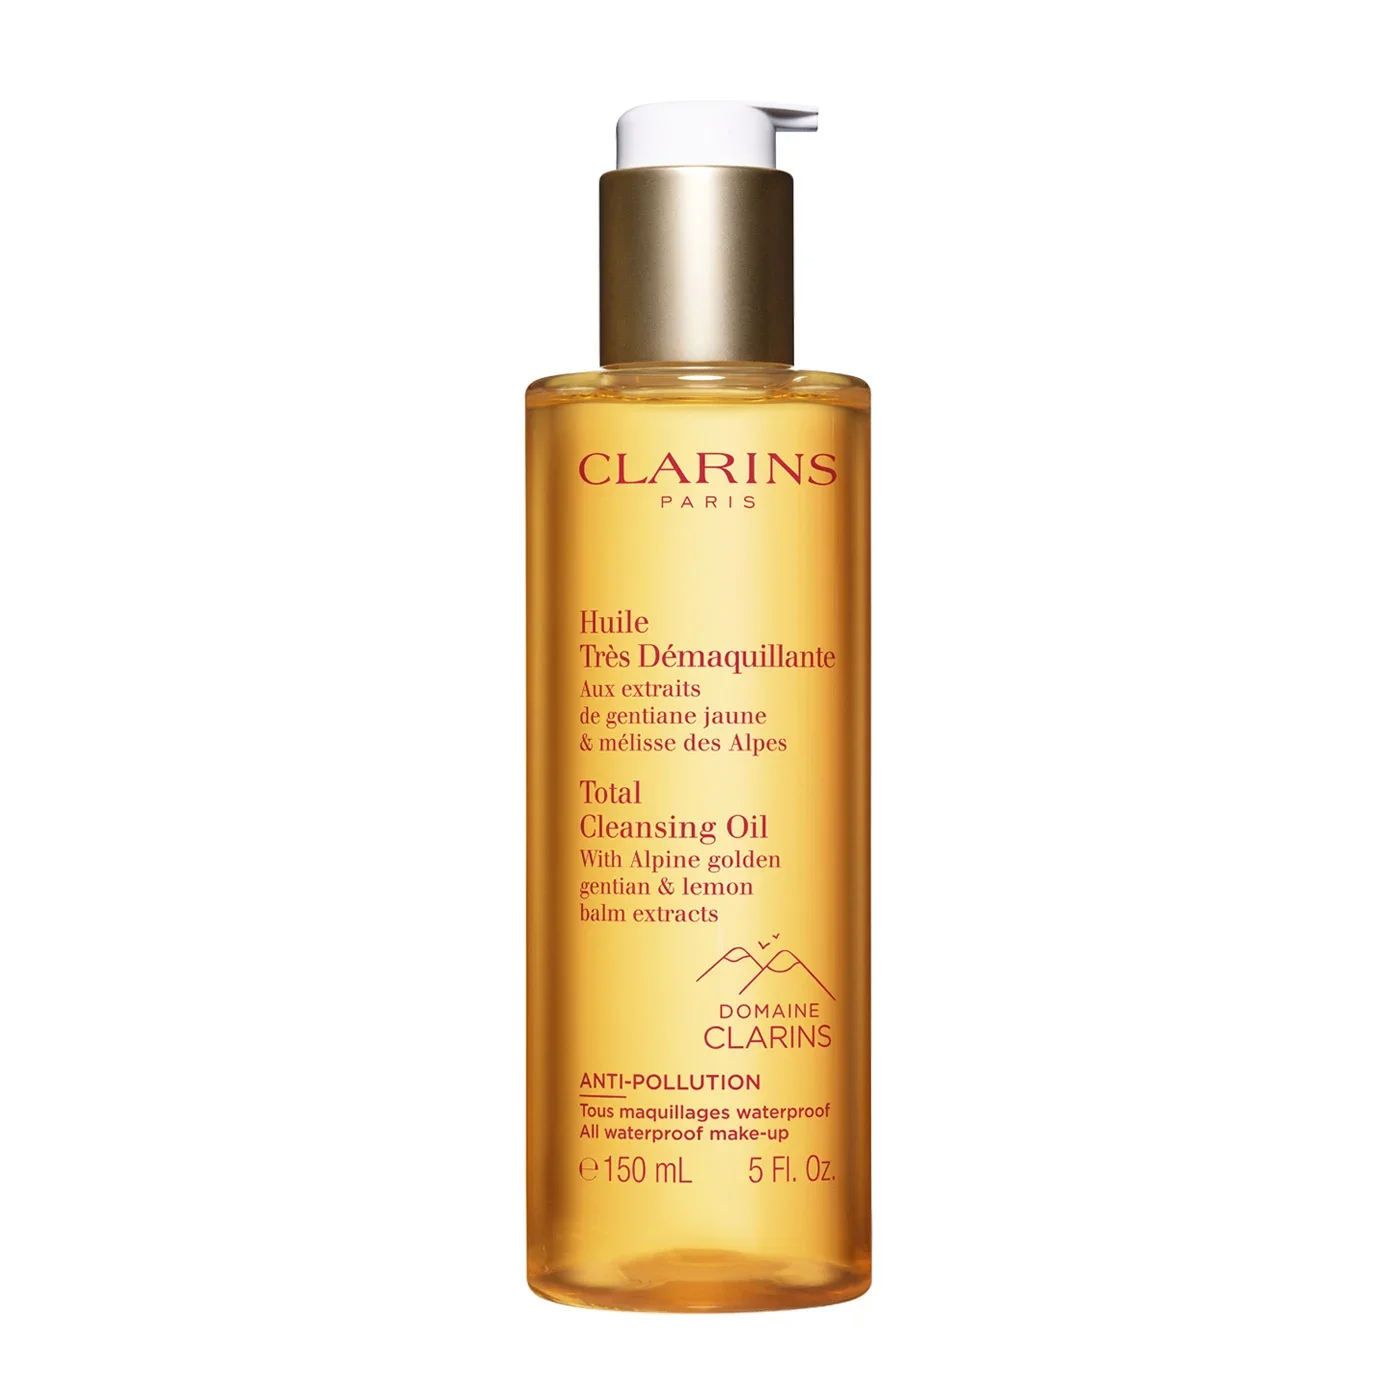 8 Clarins Total Cleansing Oil.jpeg